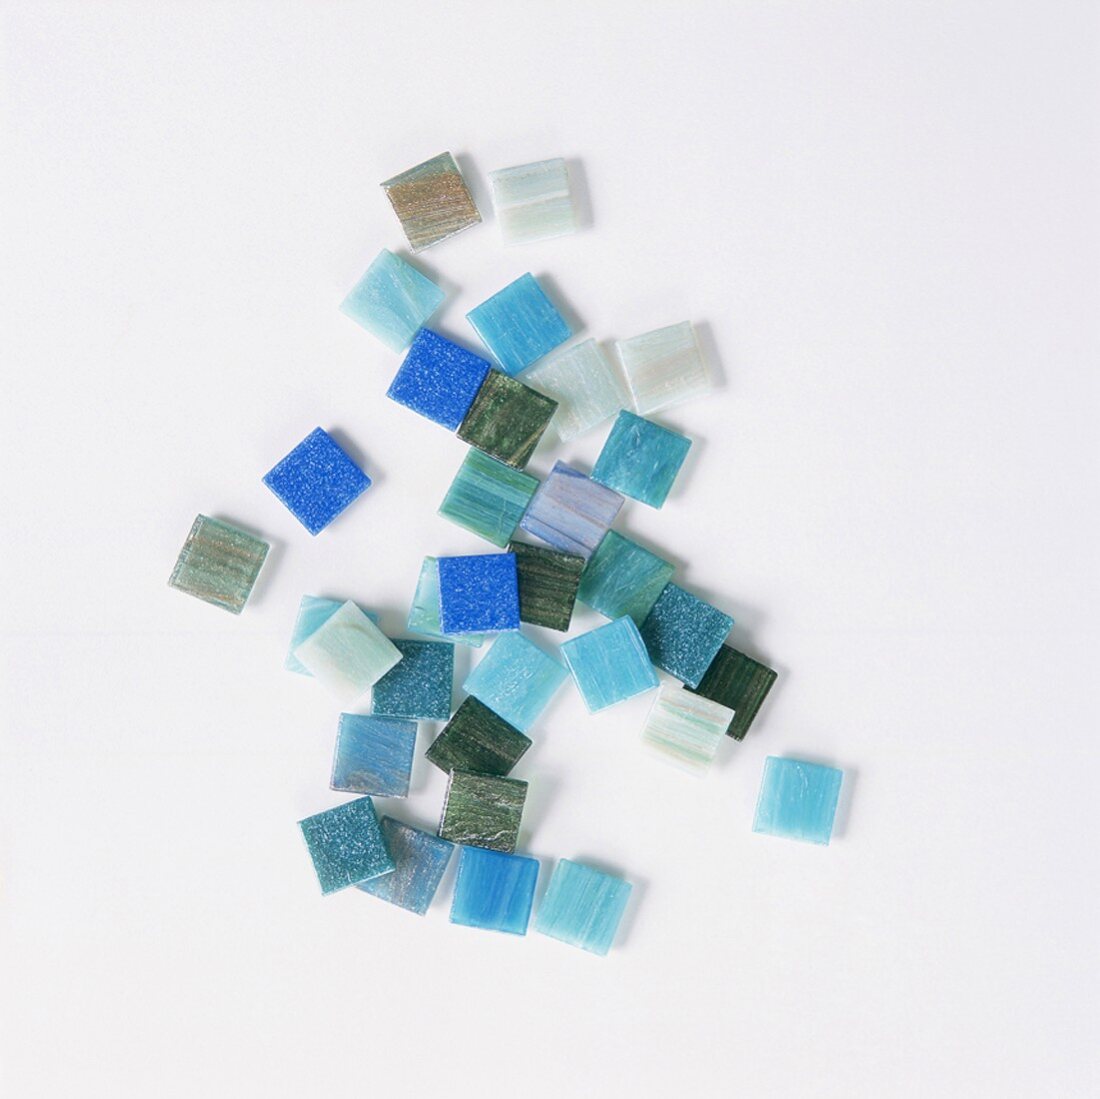 Glass tesserae in shades of grey and blue